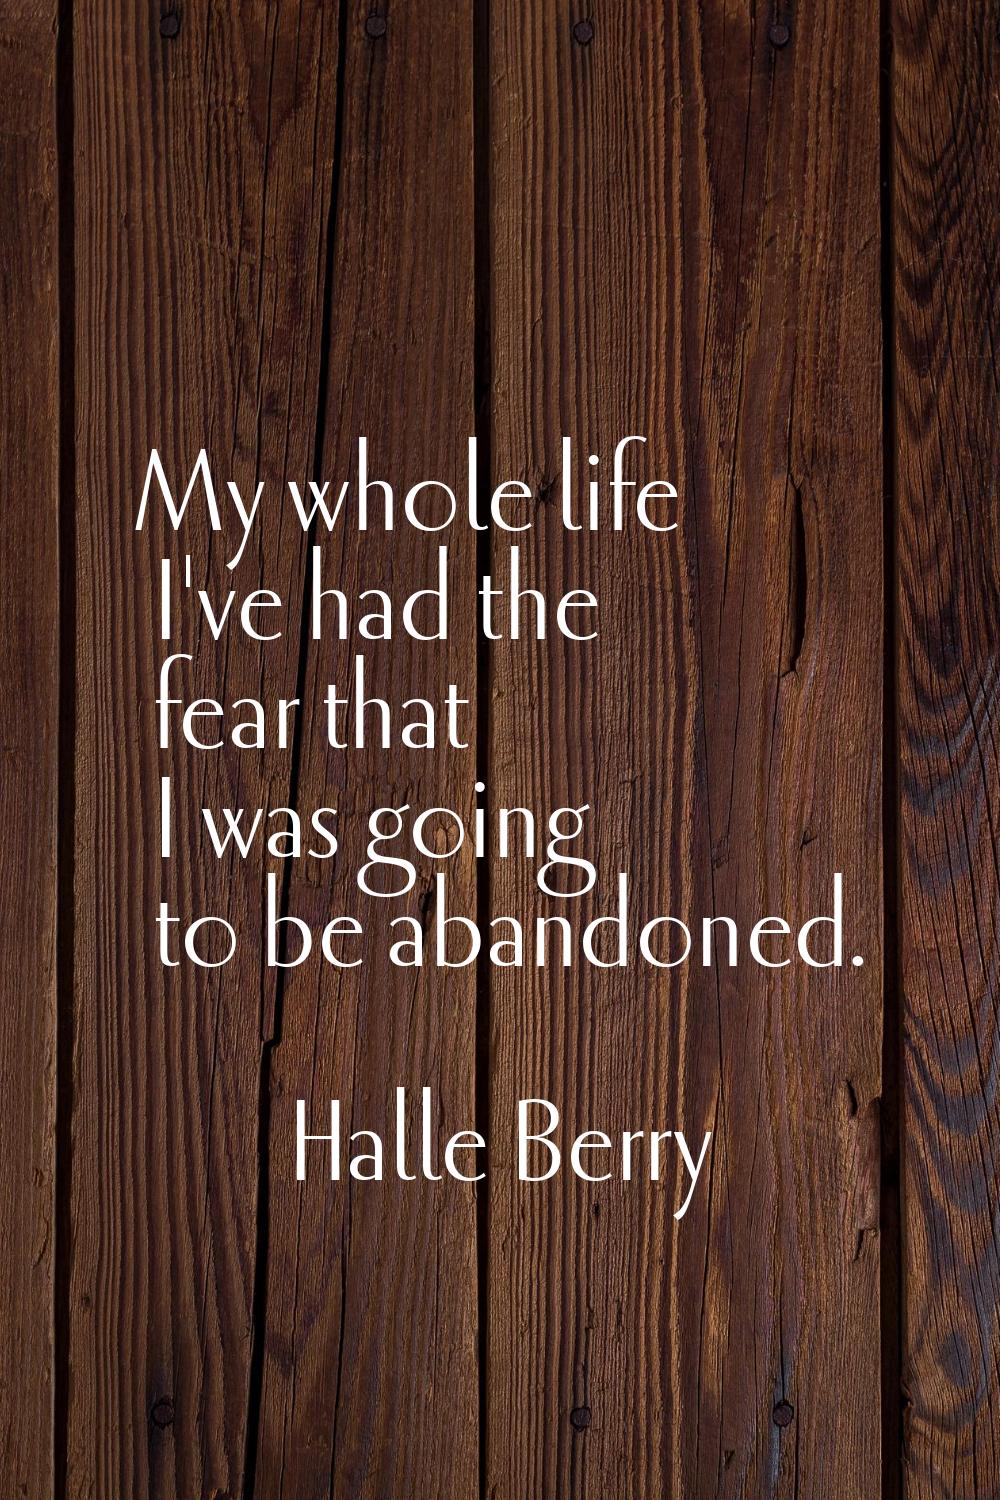 My whole life I've had the fear that I was going to be abandoned.